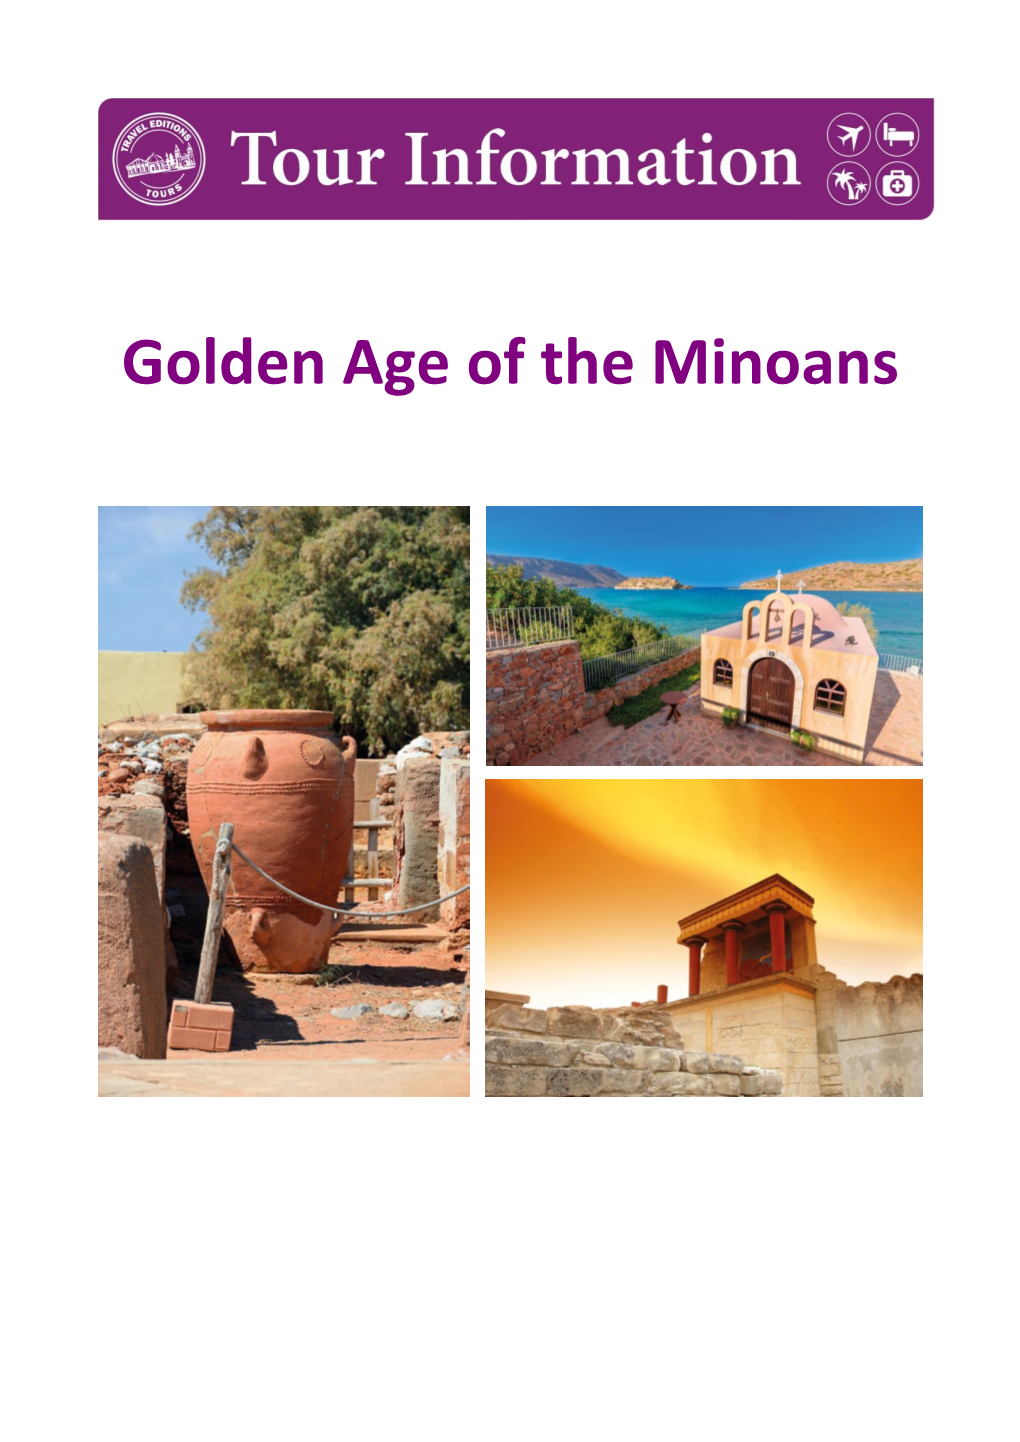 Golden Age of the Minoans